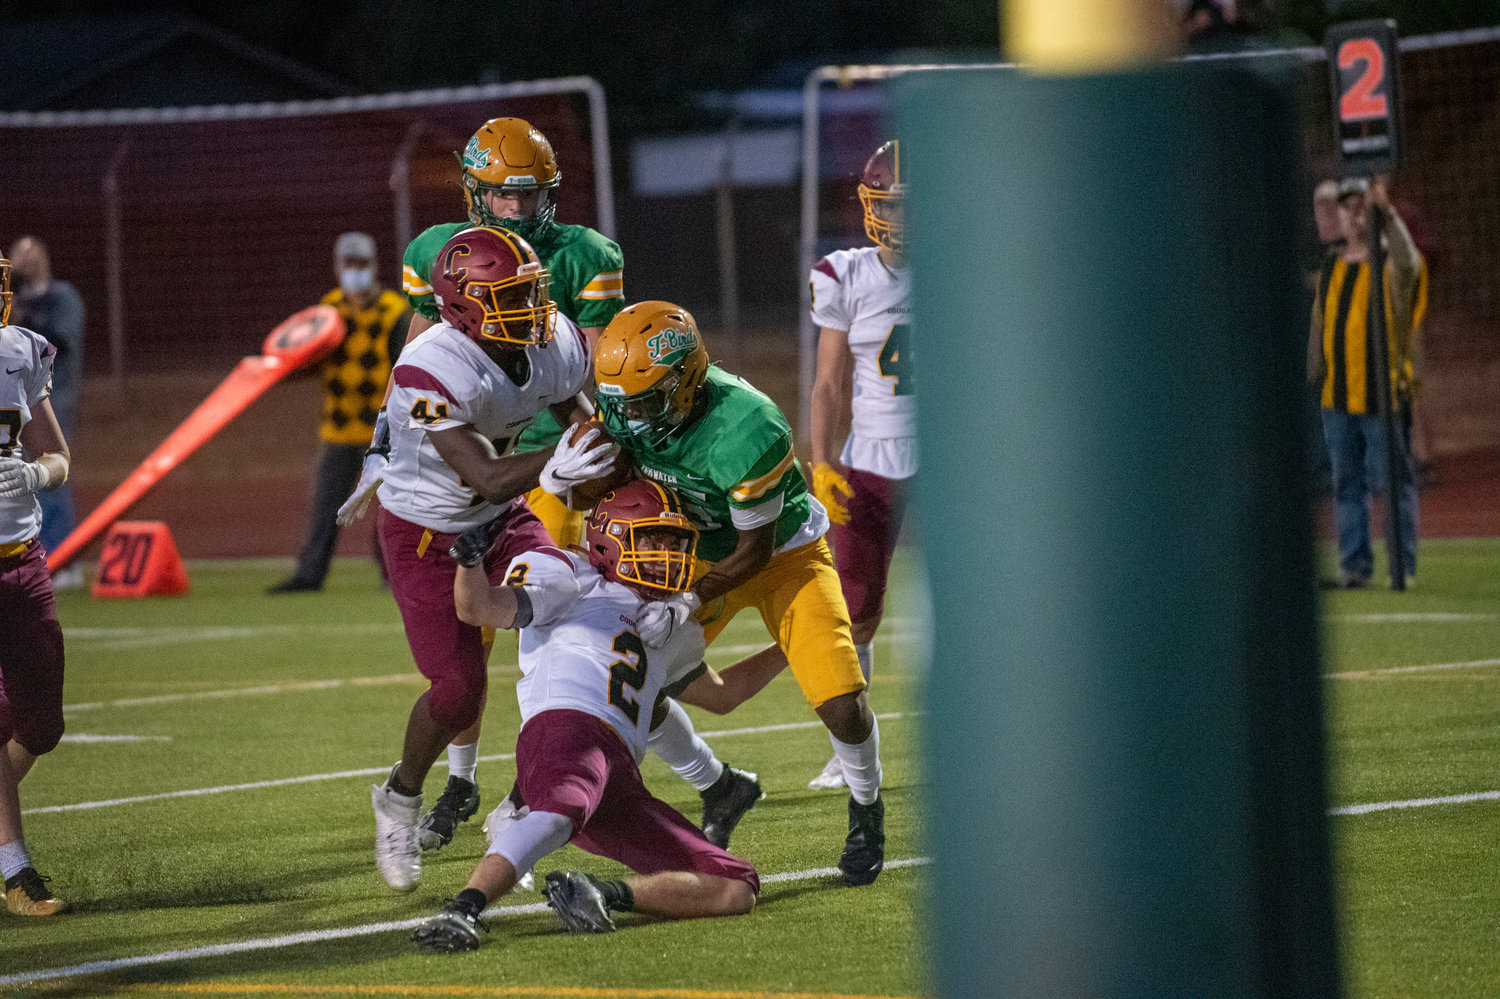 Tumwater running back Carlos Matheney runs for an 8-yard touchdown in the second quarter against Capital on Thursday.